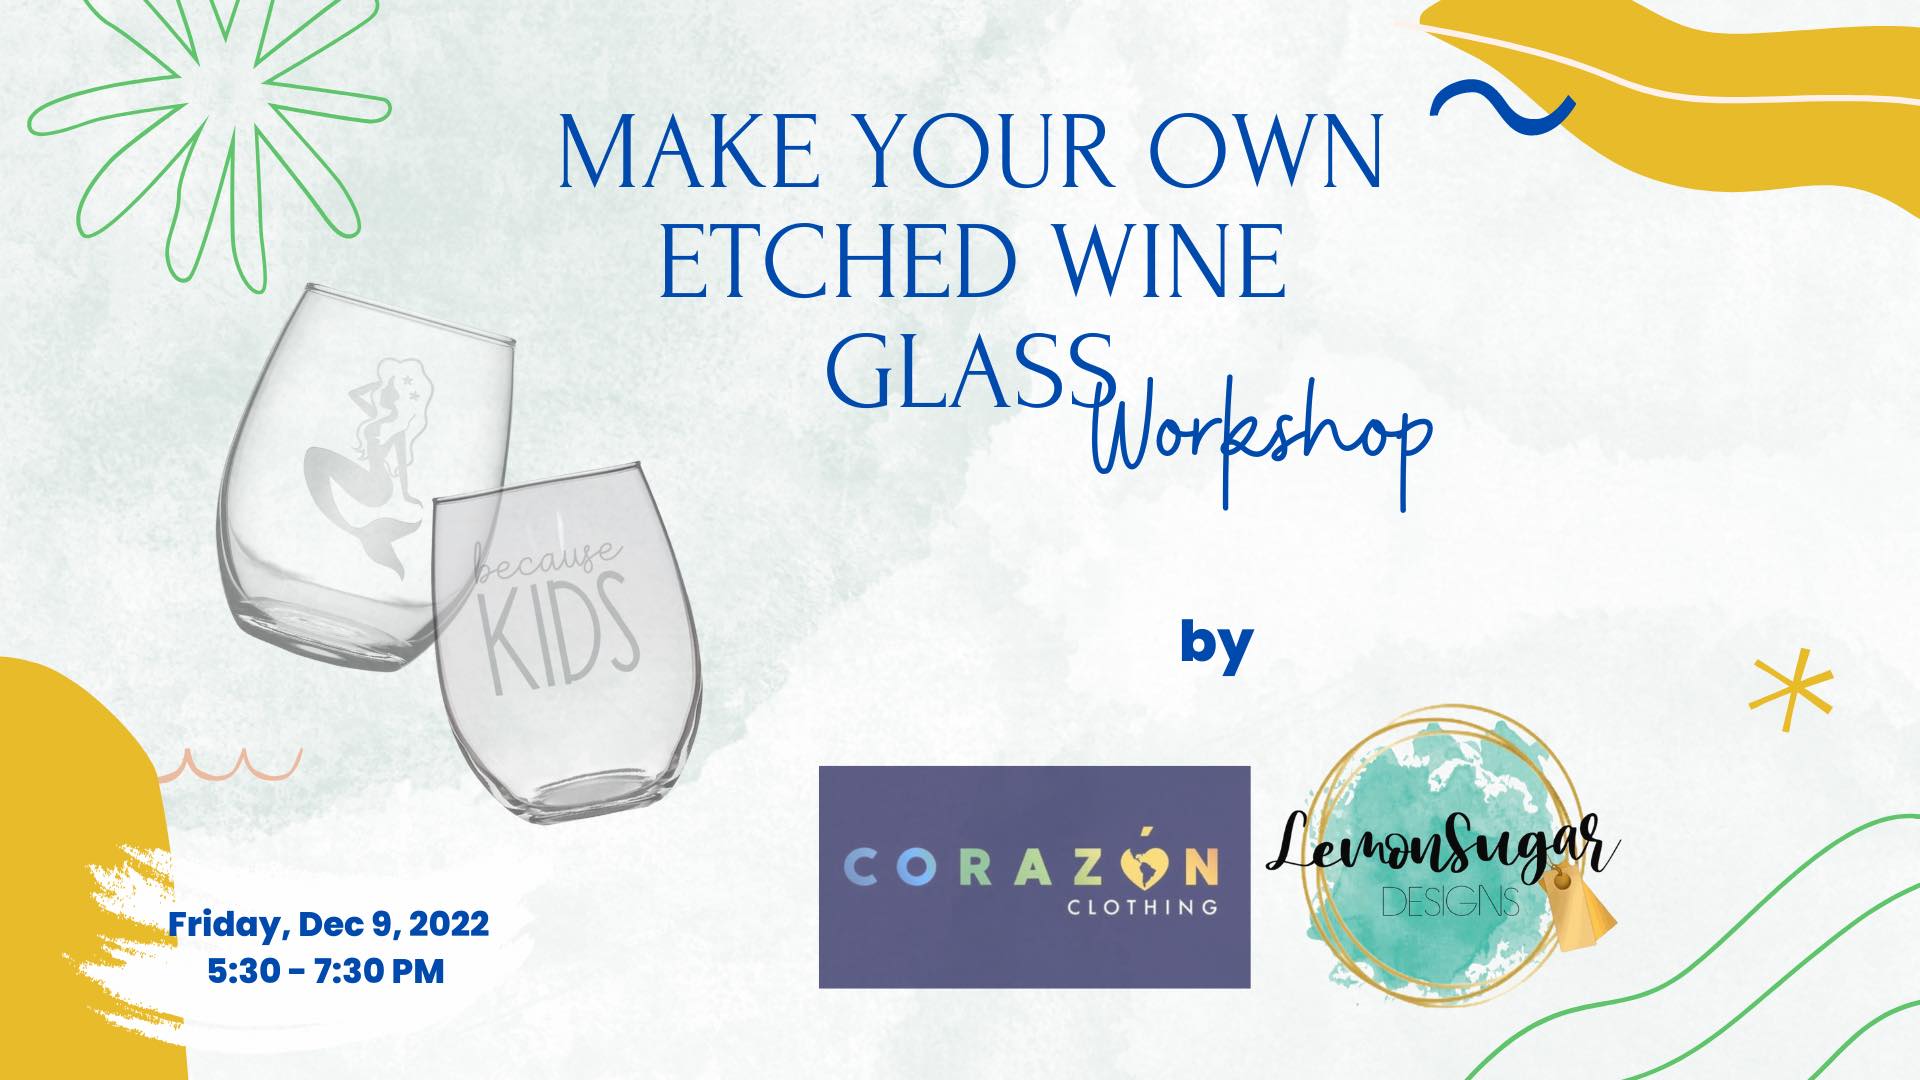 Make Your Own Etched Wine Glass